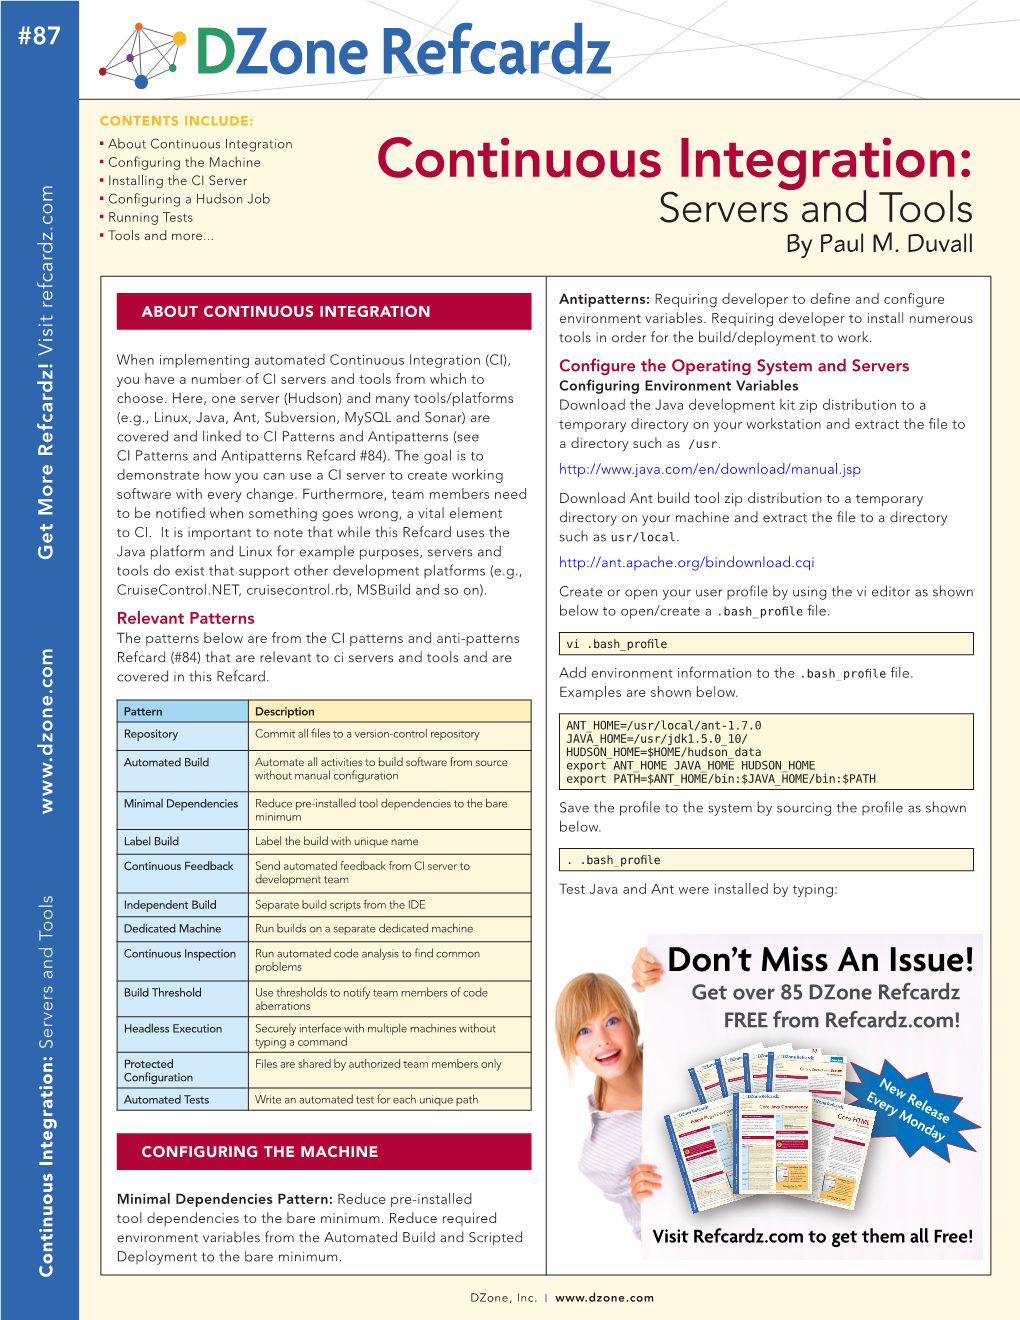 Continuous Integration: N Configuring a Hudson Job N Running Tests Servers and Tools N Tools and More